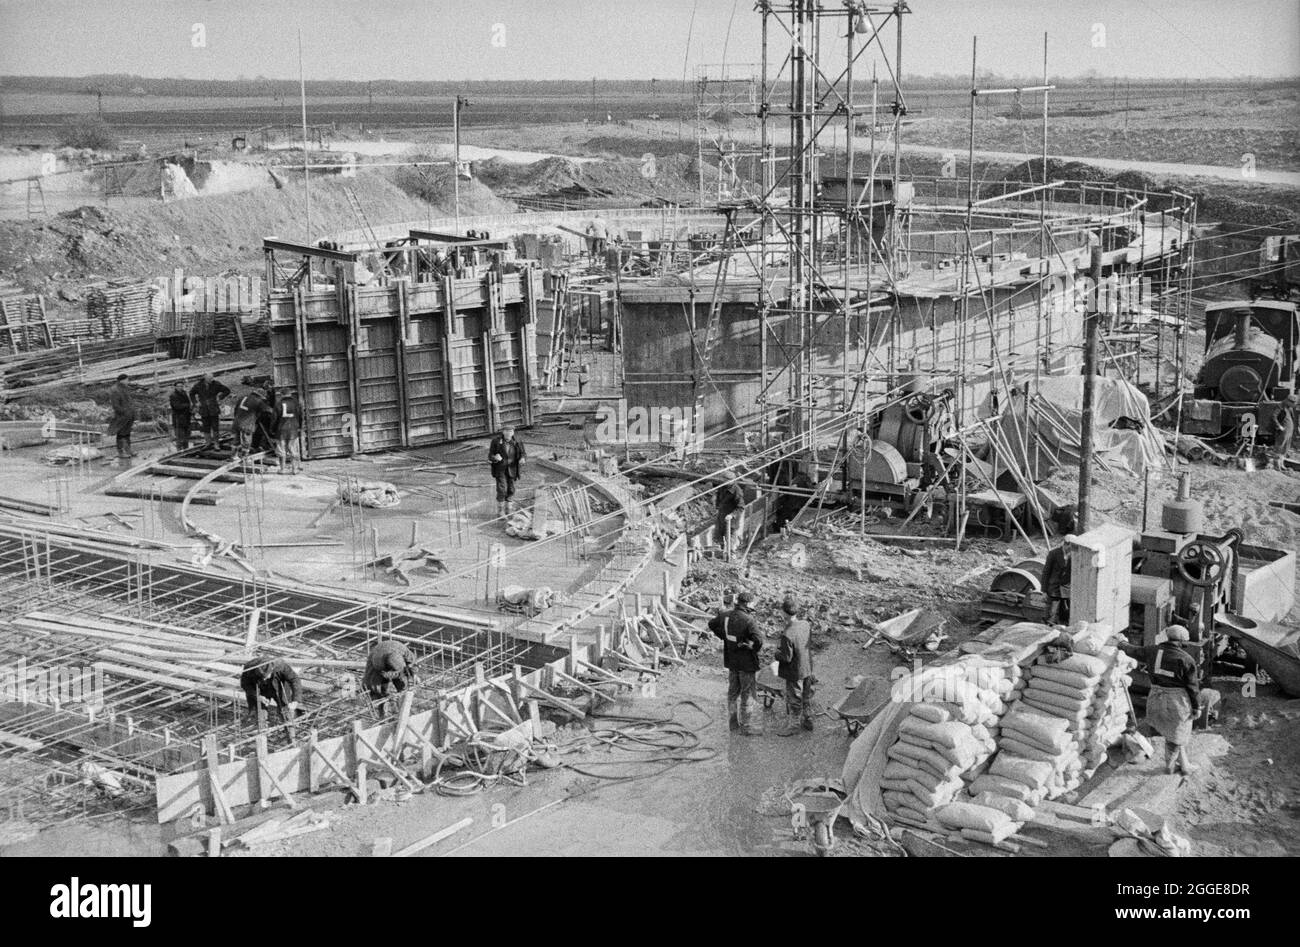 A view over the construction site for two sugar silos at Bardney Sugar Factory, showing Laing workers carrying out various tasks. Two sugar silos were built by Laing for the British Sugar Corporation Limited at the Bardney Sugar Factory. The prestressed post-tensioned concrete silos were made with sliding formwork using hydraulic climbing jacks. Stock Photo